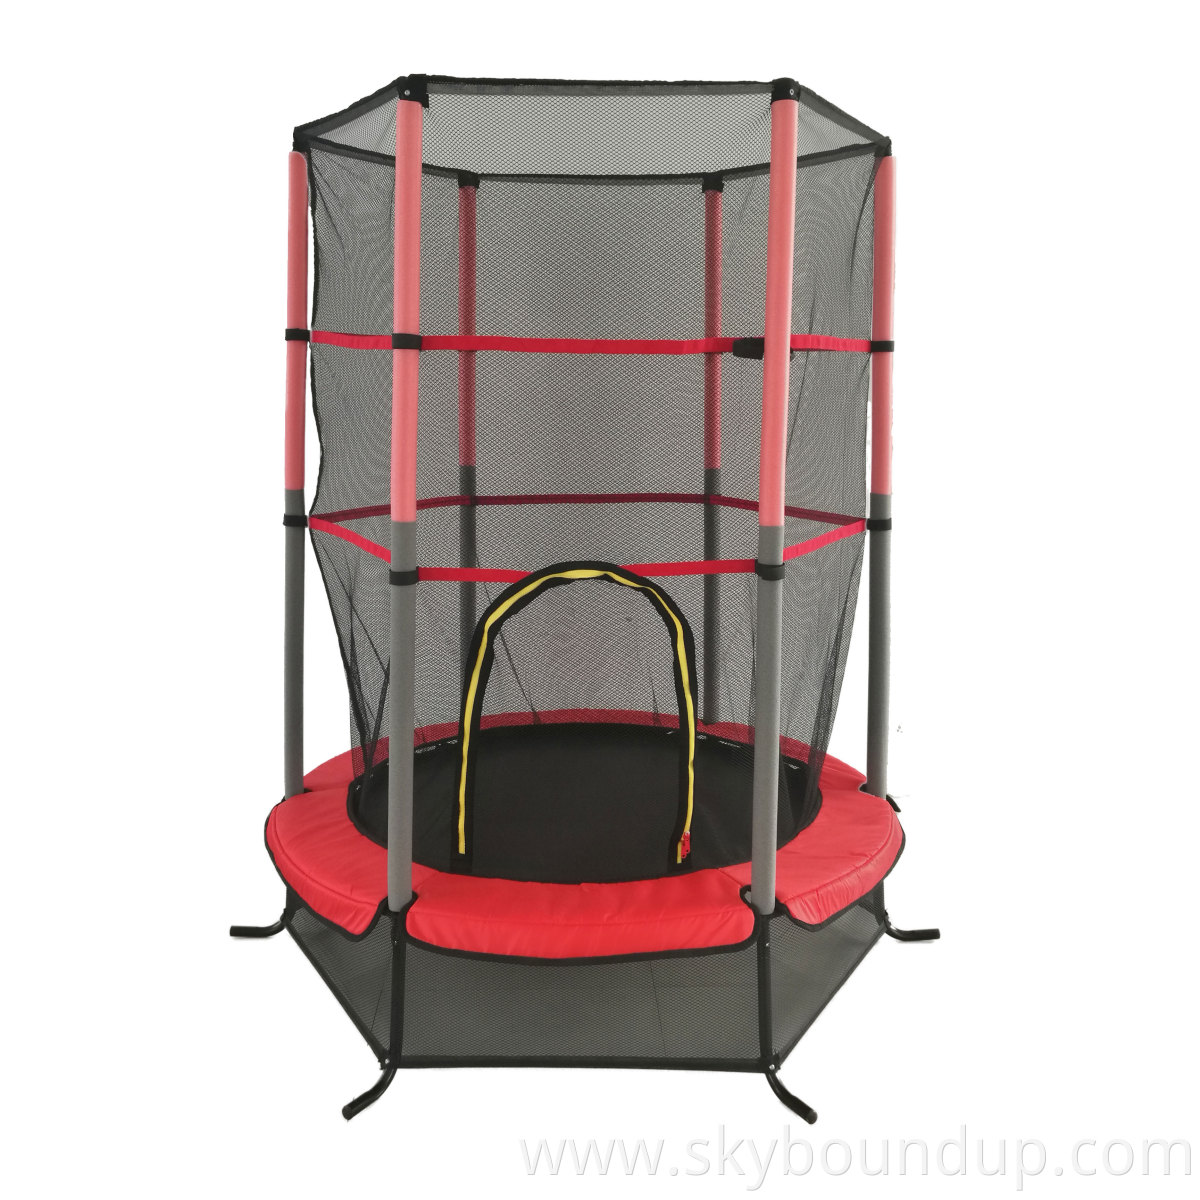 55 inch Trampoline for Children's Sports with Safety Net Enclosure & Foam Pad